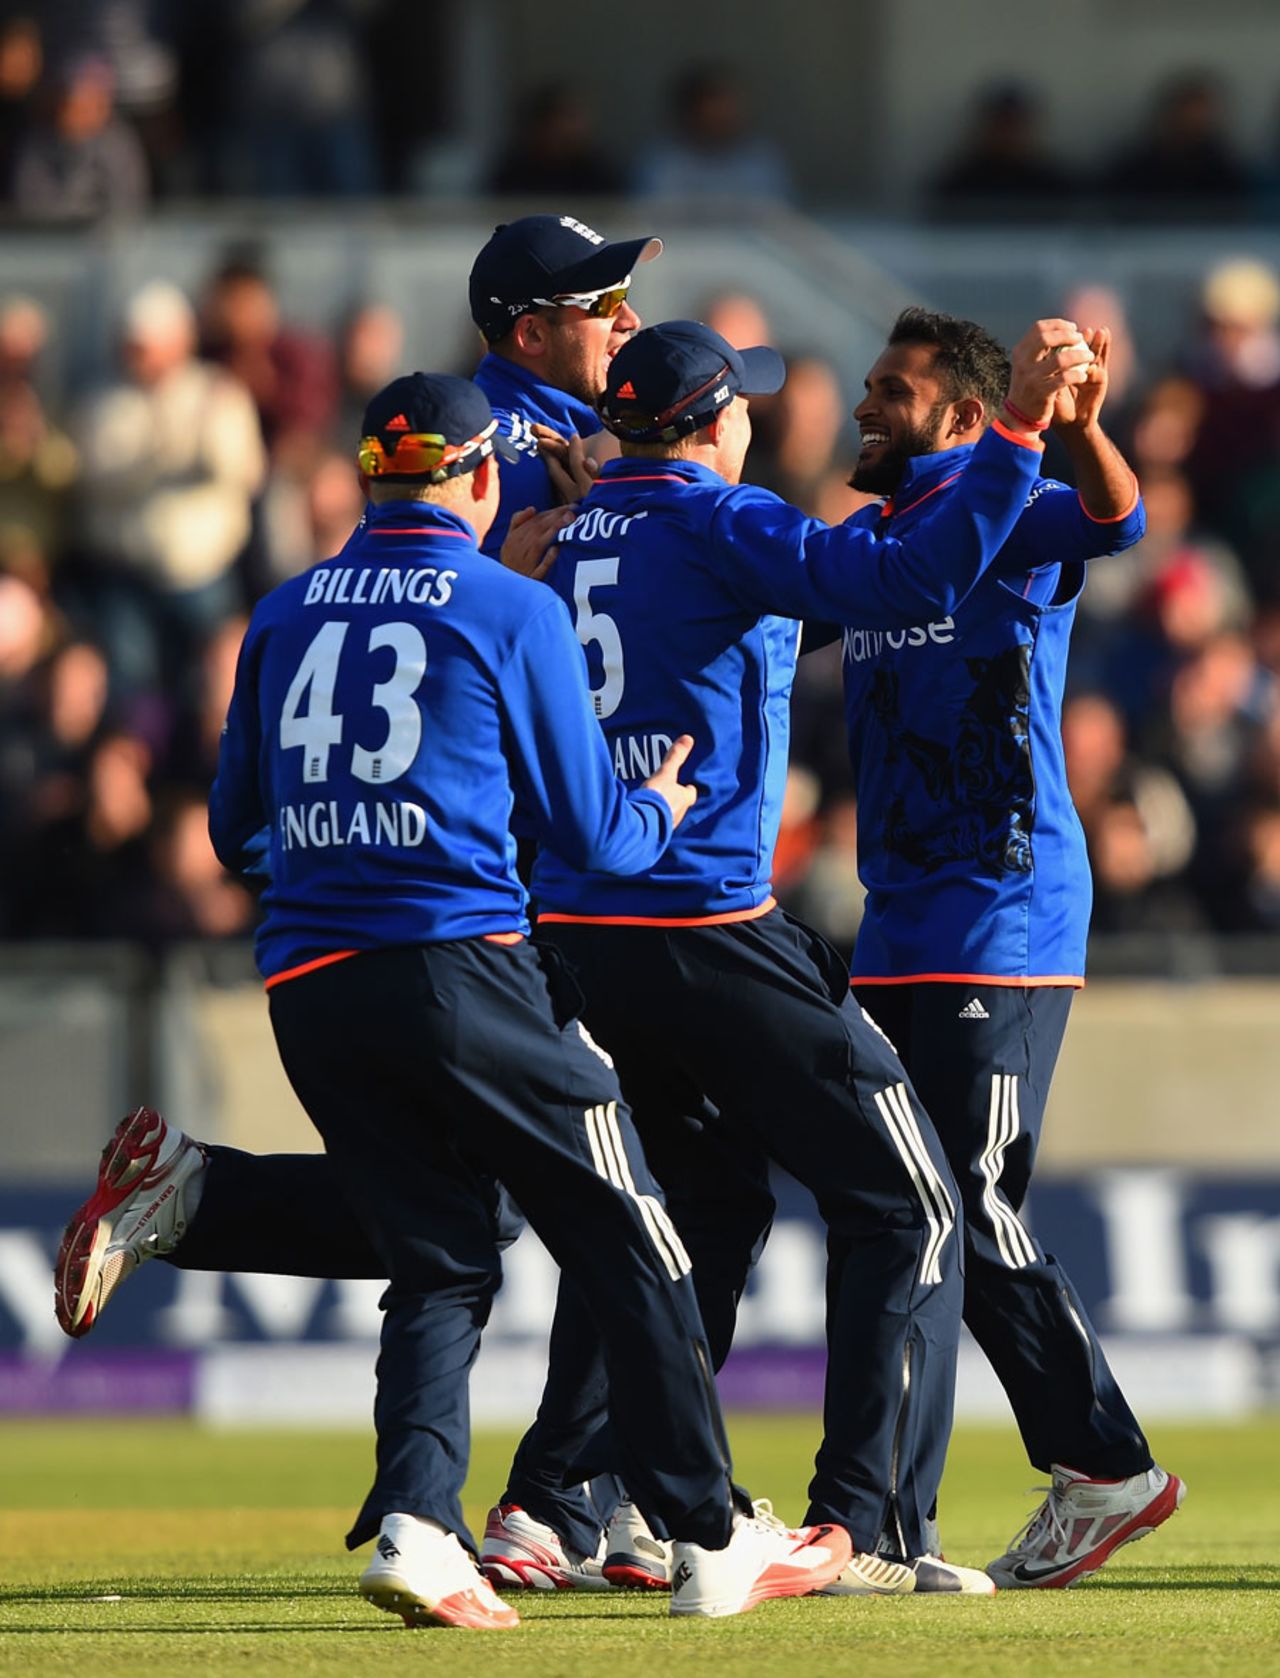 Adil Rashid is mobbed after taking one of his four wickets, England v New Zealand, 1st ODI, Edgbaston, June 9, 2015